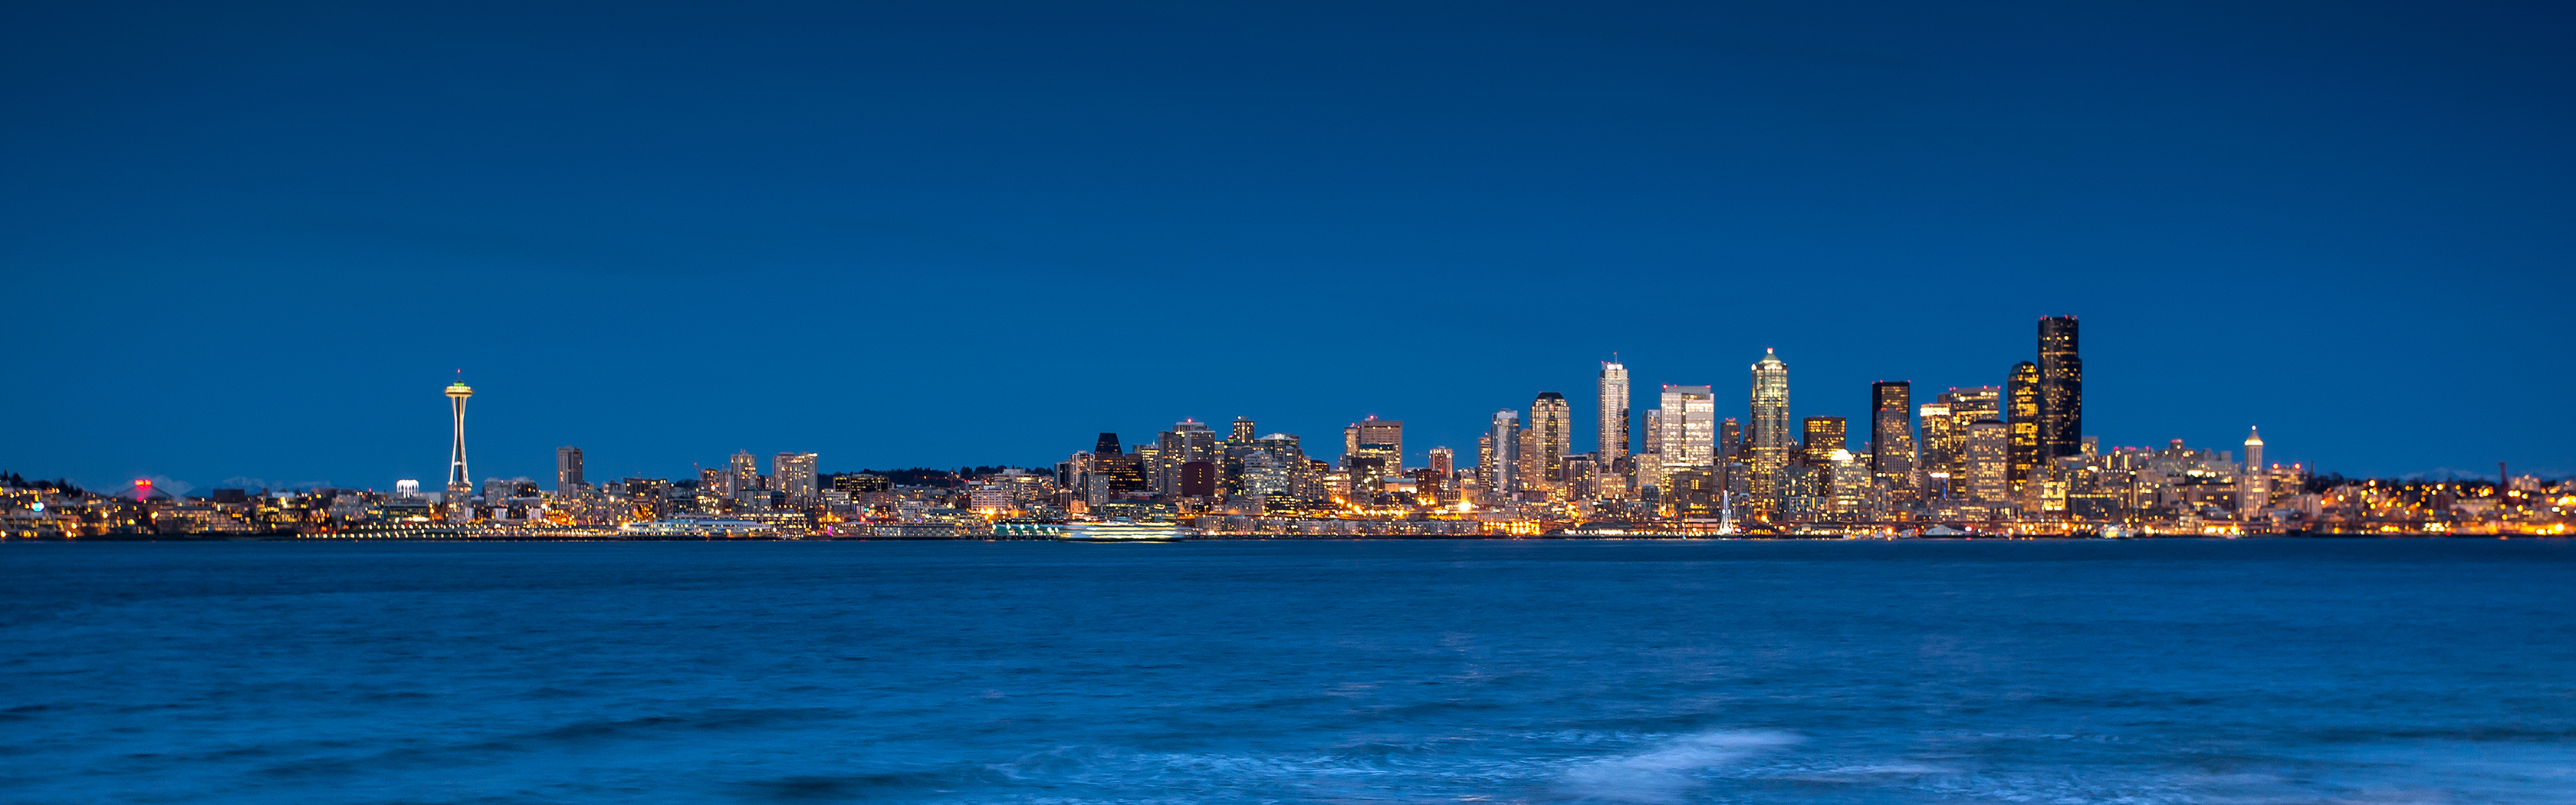 seattle from the beach by jeffery hayes april 13th 2013 seattle just 3360x1050